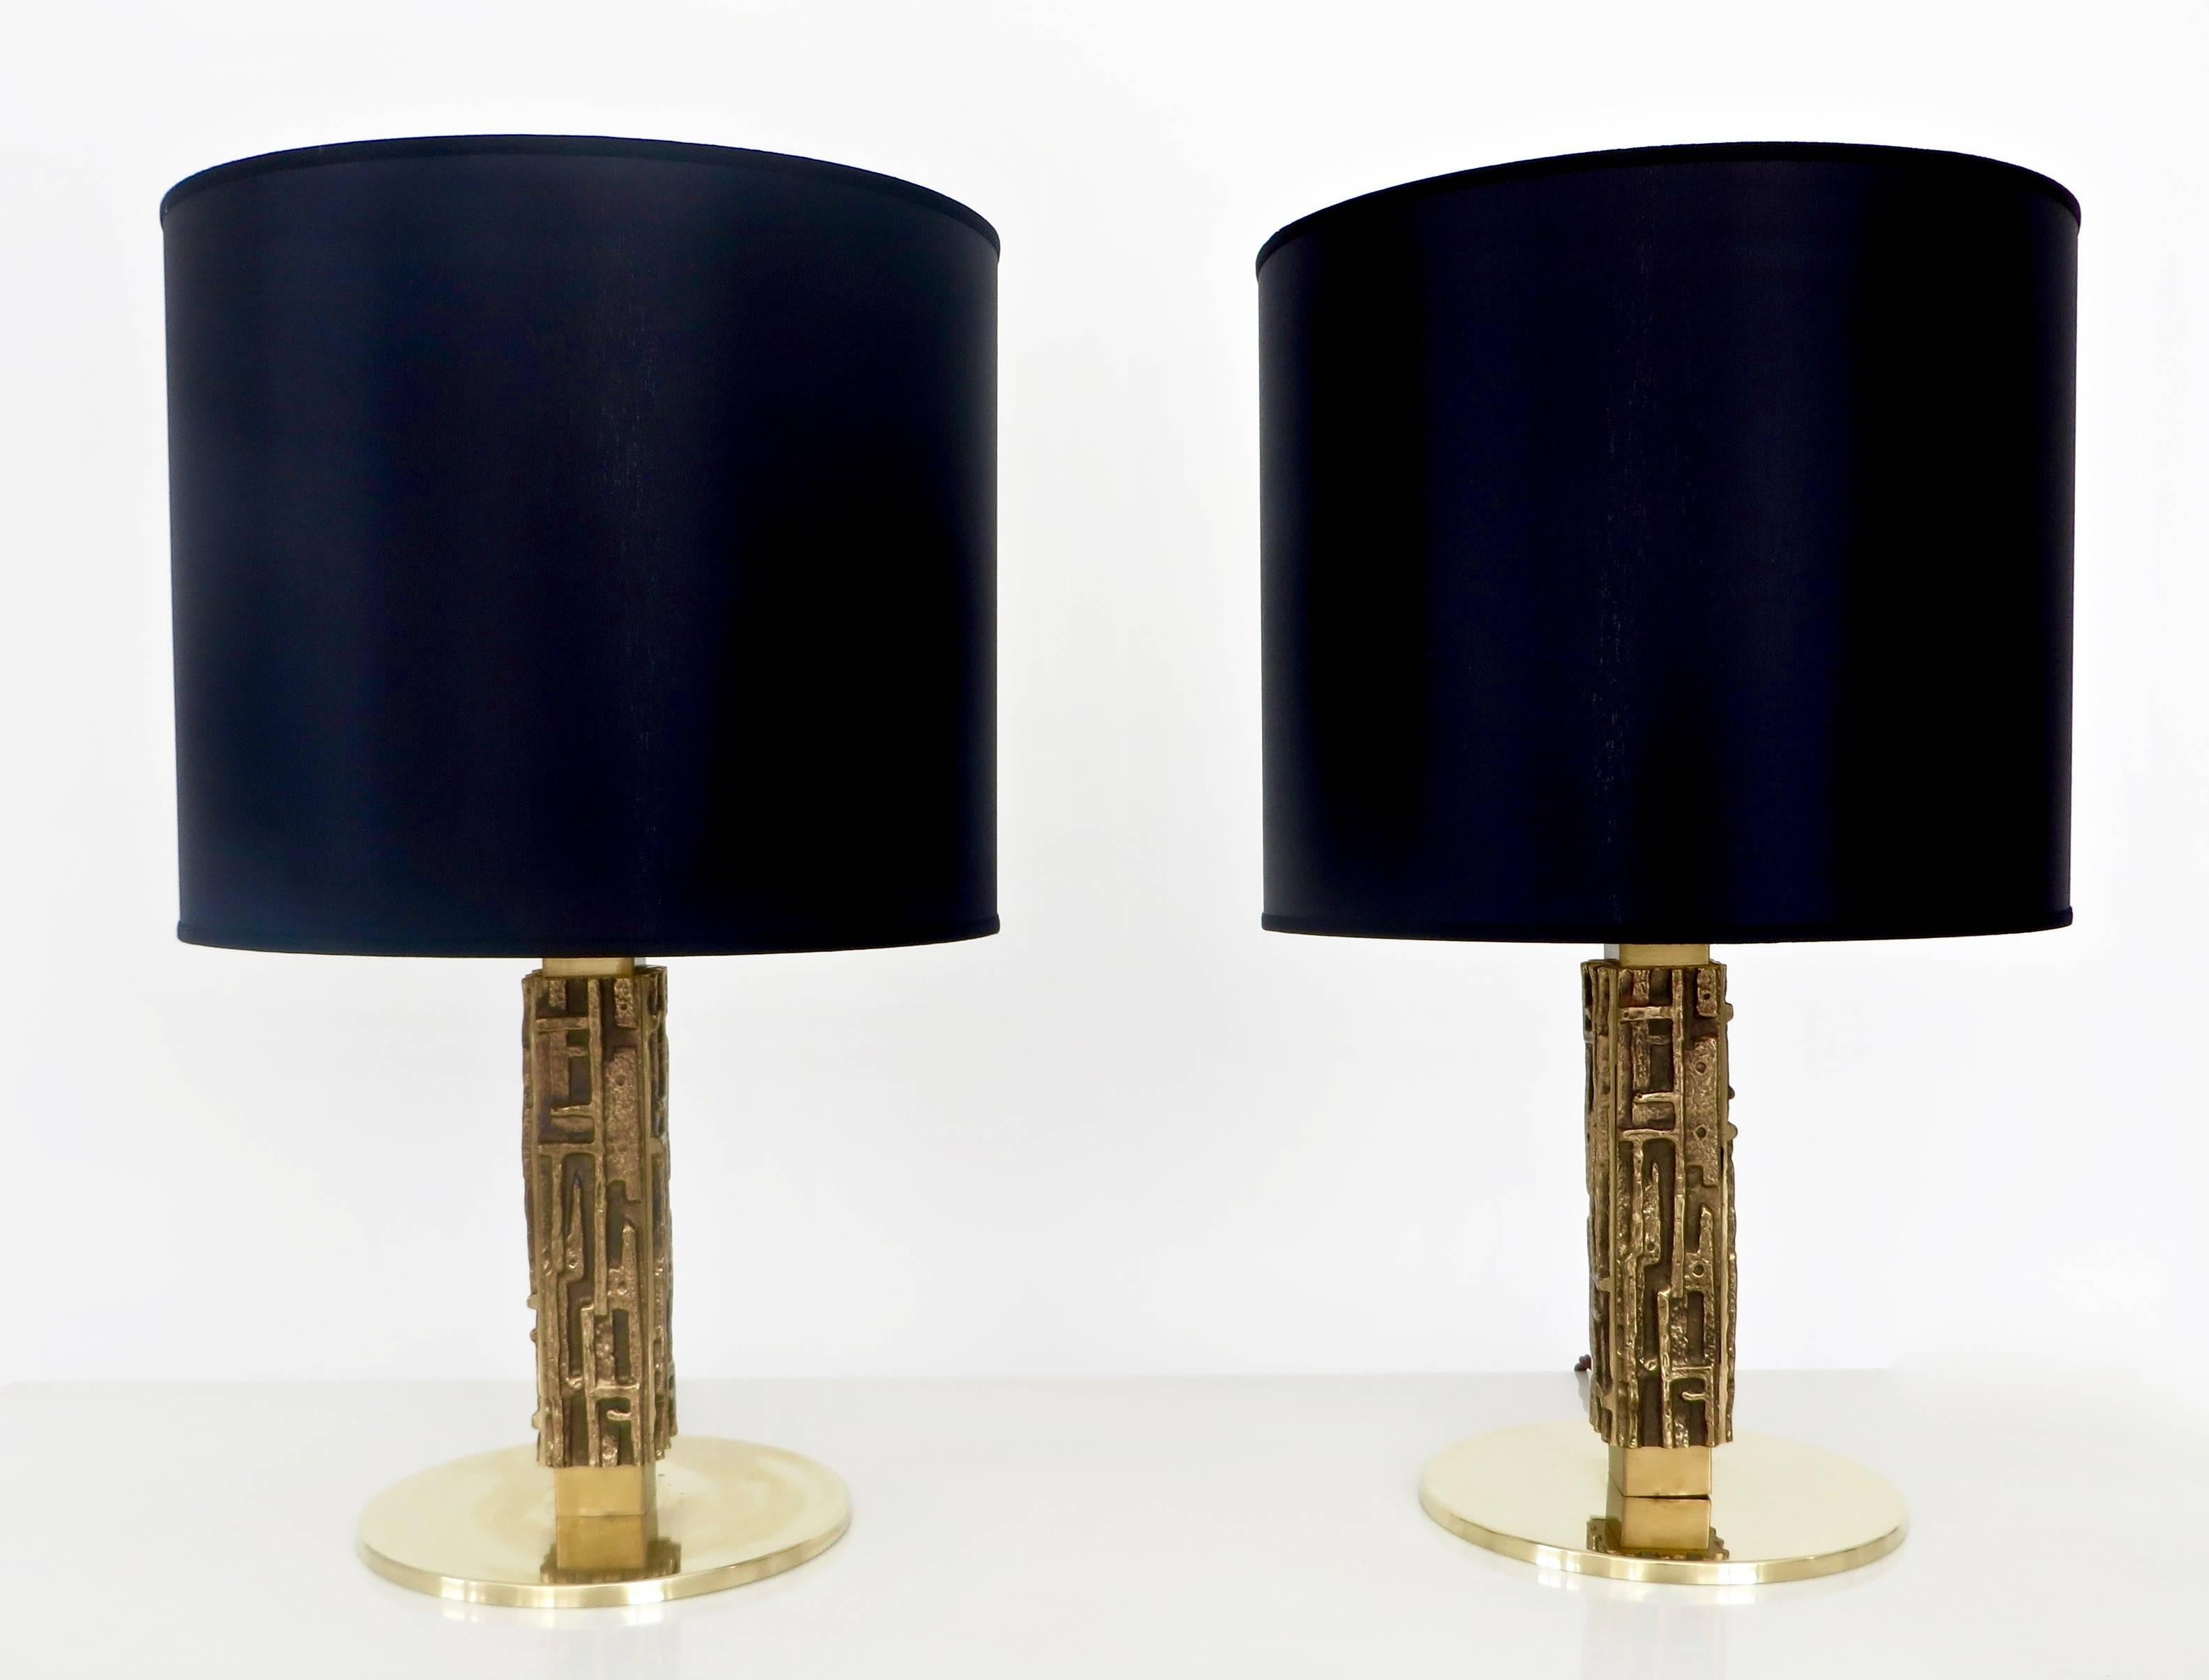 A pair of Luciano Frigerio bronze sculptural table lamps by Esperia with black linen and shiny gold paper lined new shades.
Beautiful patina with little signs of wear on the base.
A sculptural squared column on round brass base which is 9.75